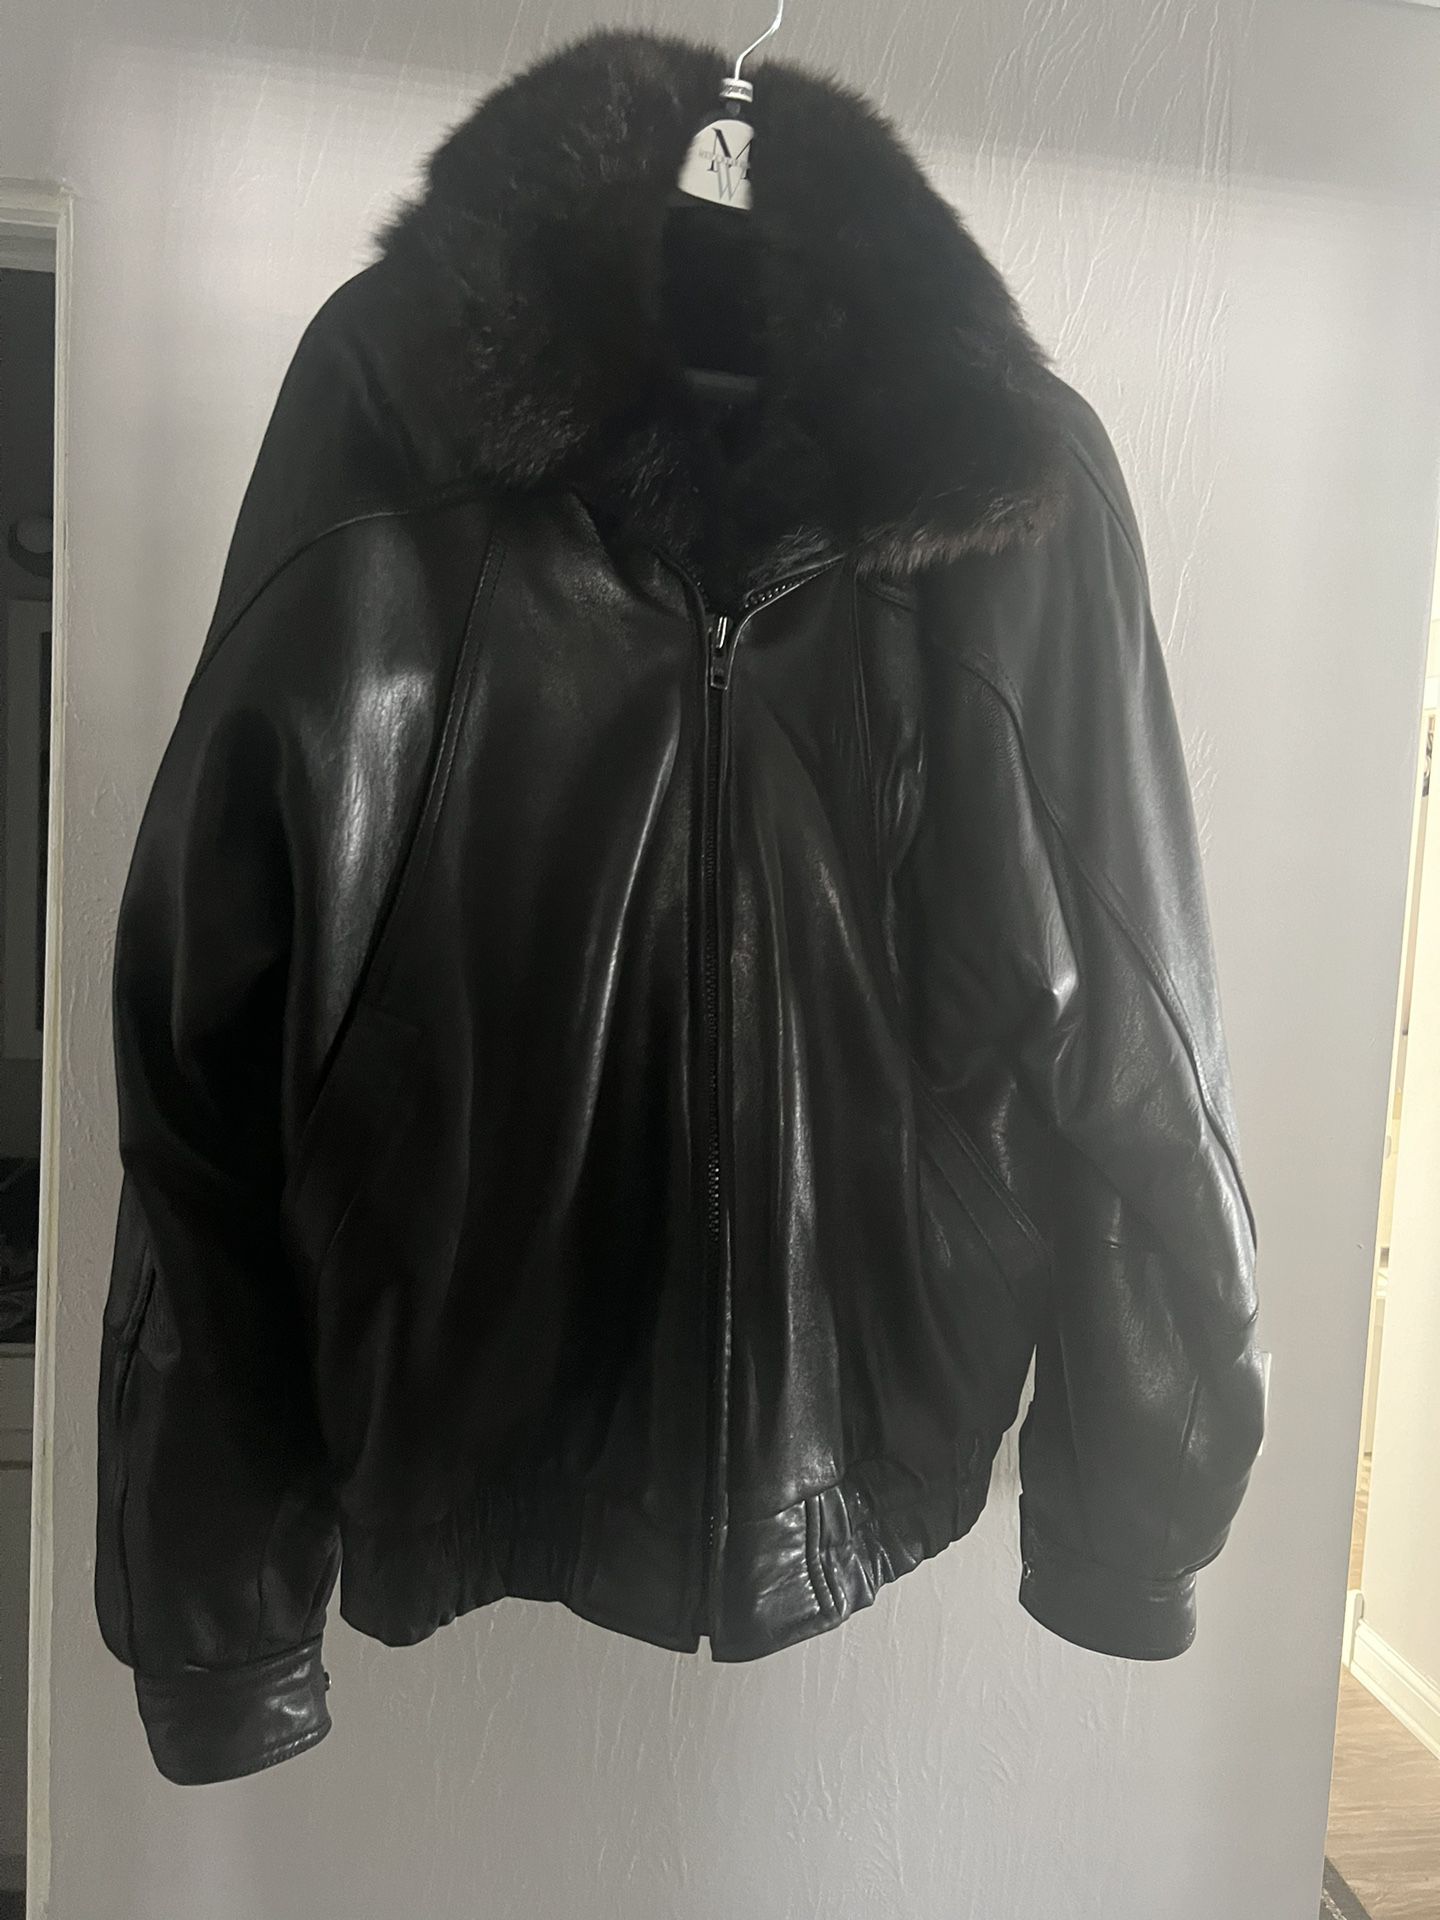 Mens Fur-Lined, Leather Jacket for Sale in Dyer, IN - OfferUp